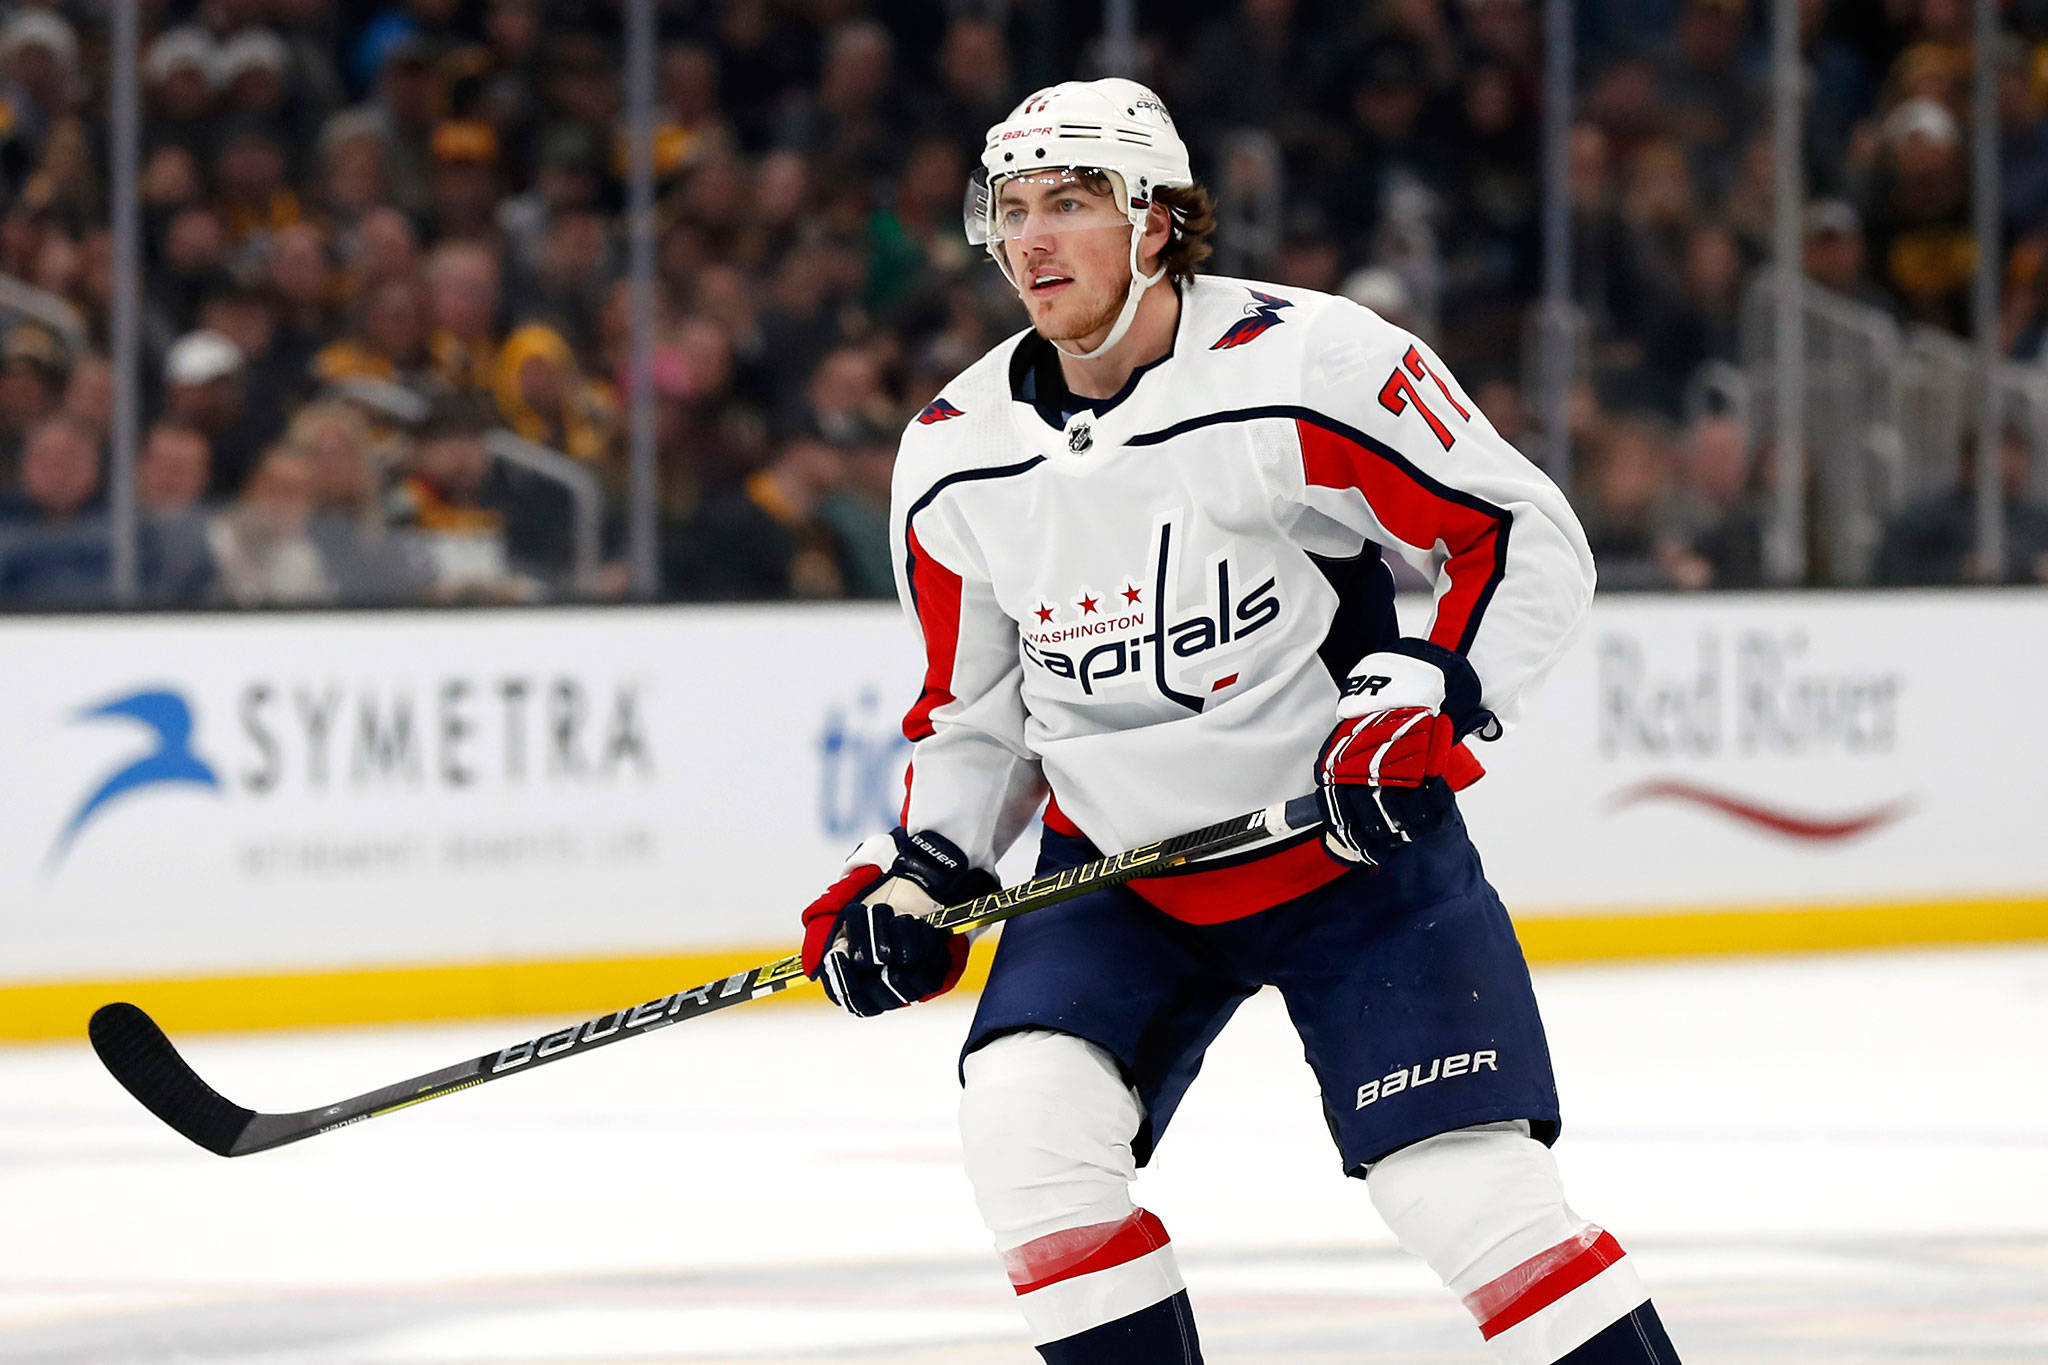 The Capitals’ T.J. Oshie, a Snohomich County native, plays against the Bruins during a game Dec. 23, 2019, in Boston. (AP Photo/Winslow Townson)